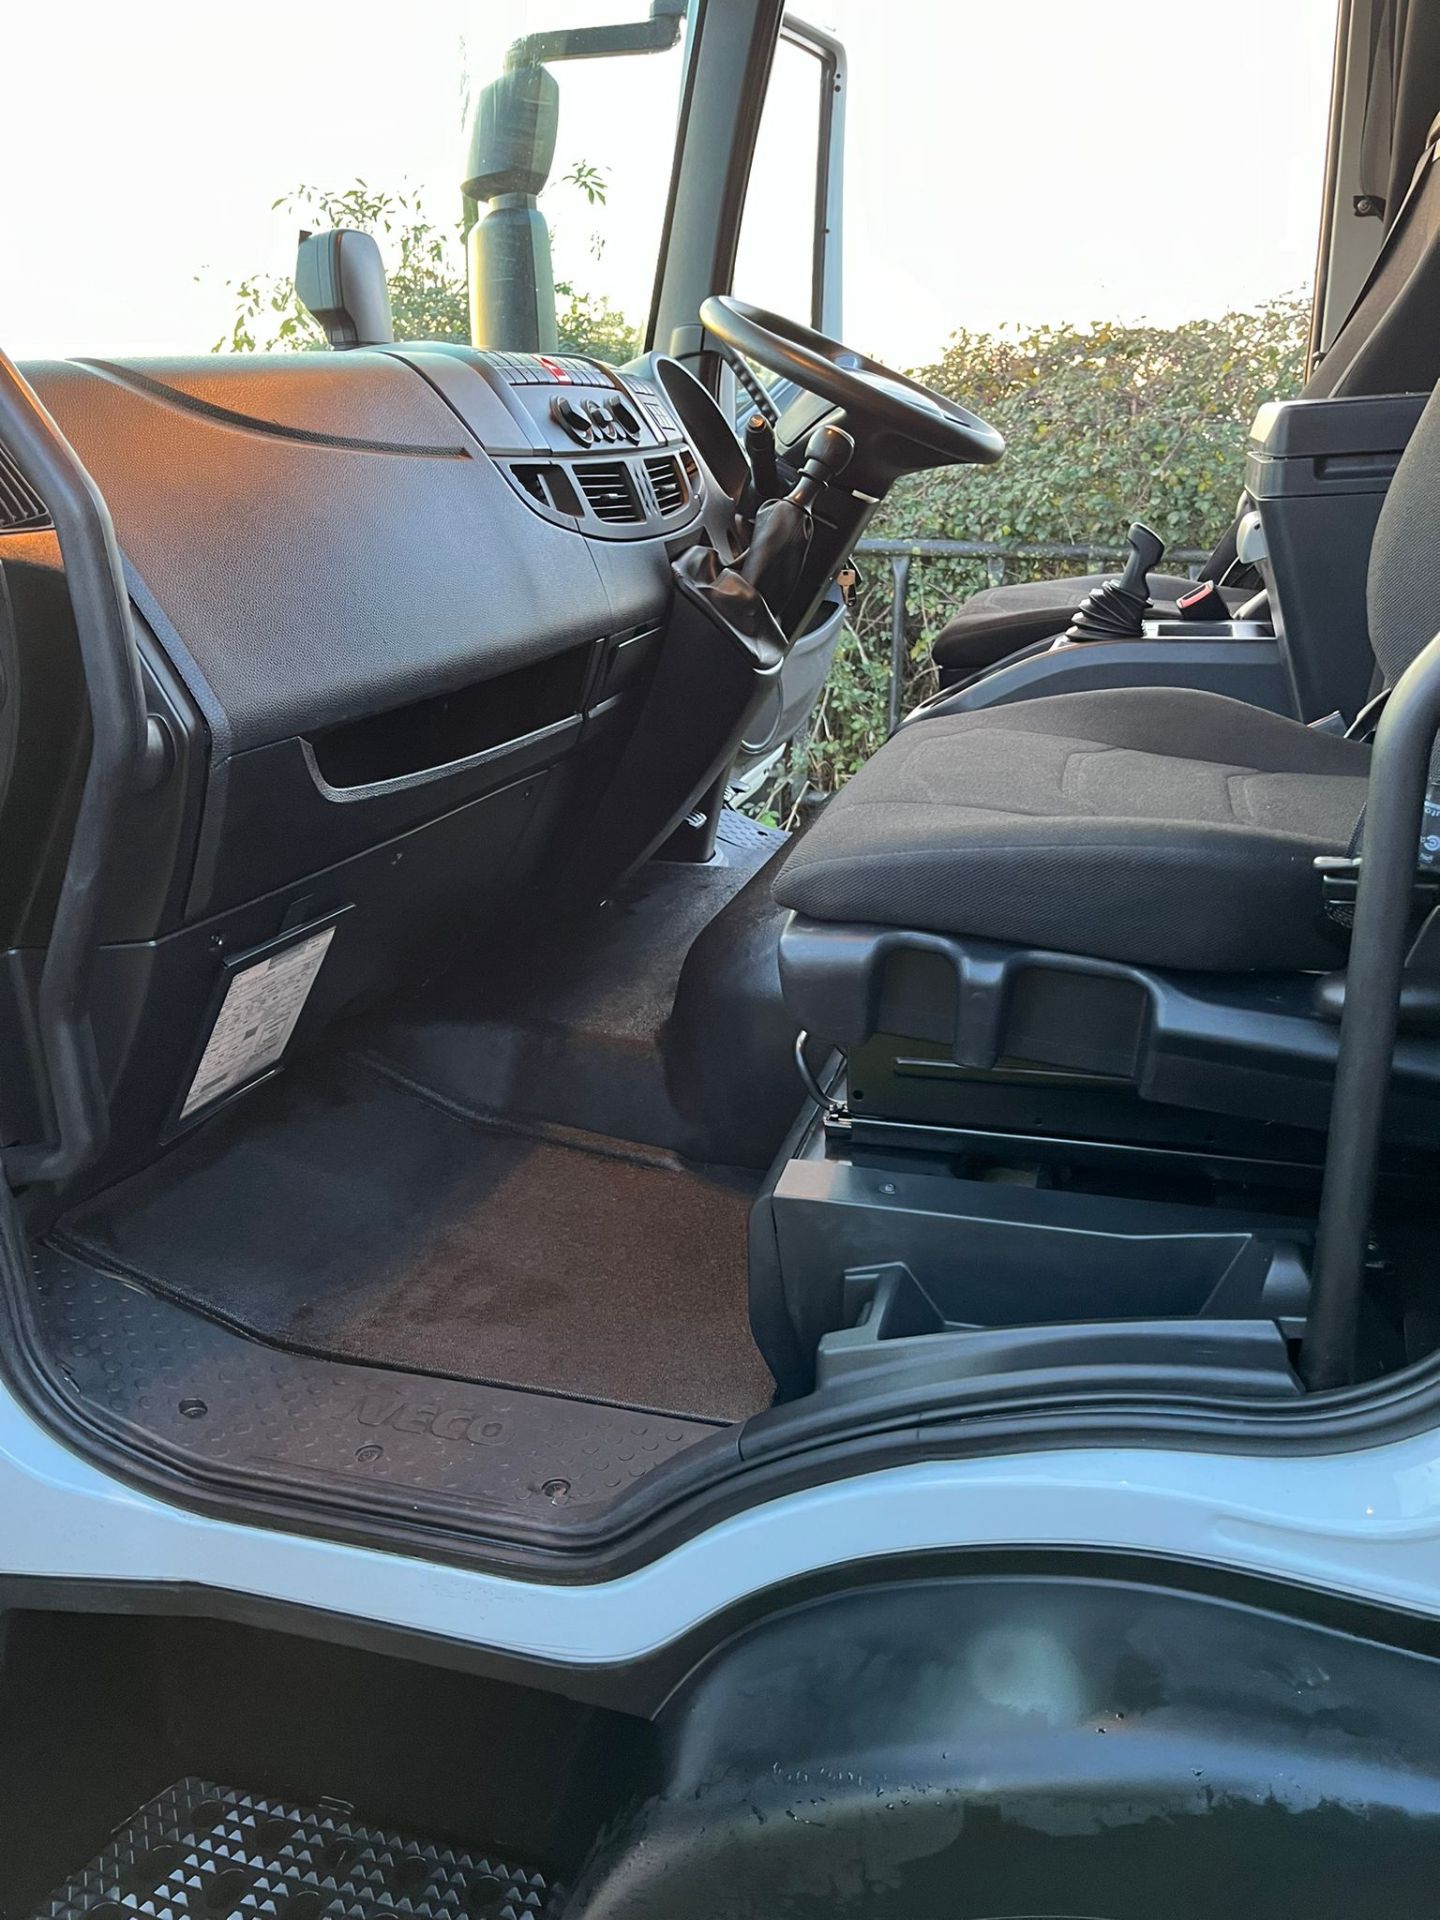 SPACIOUS SLEEPER CAB: 2019 IVECO EUROCARGO FOR HAULING - Image 21 of 21